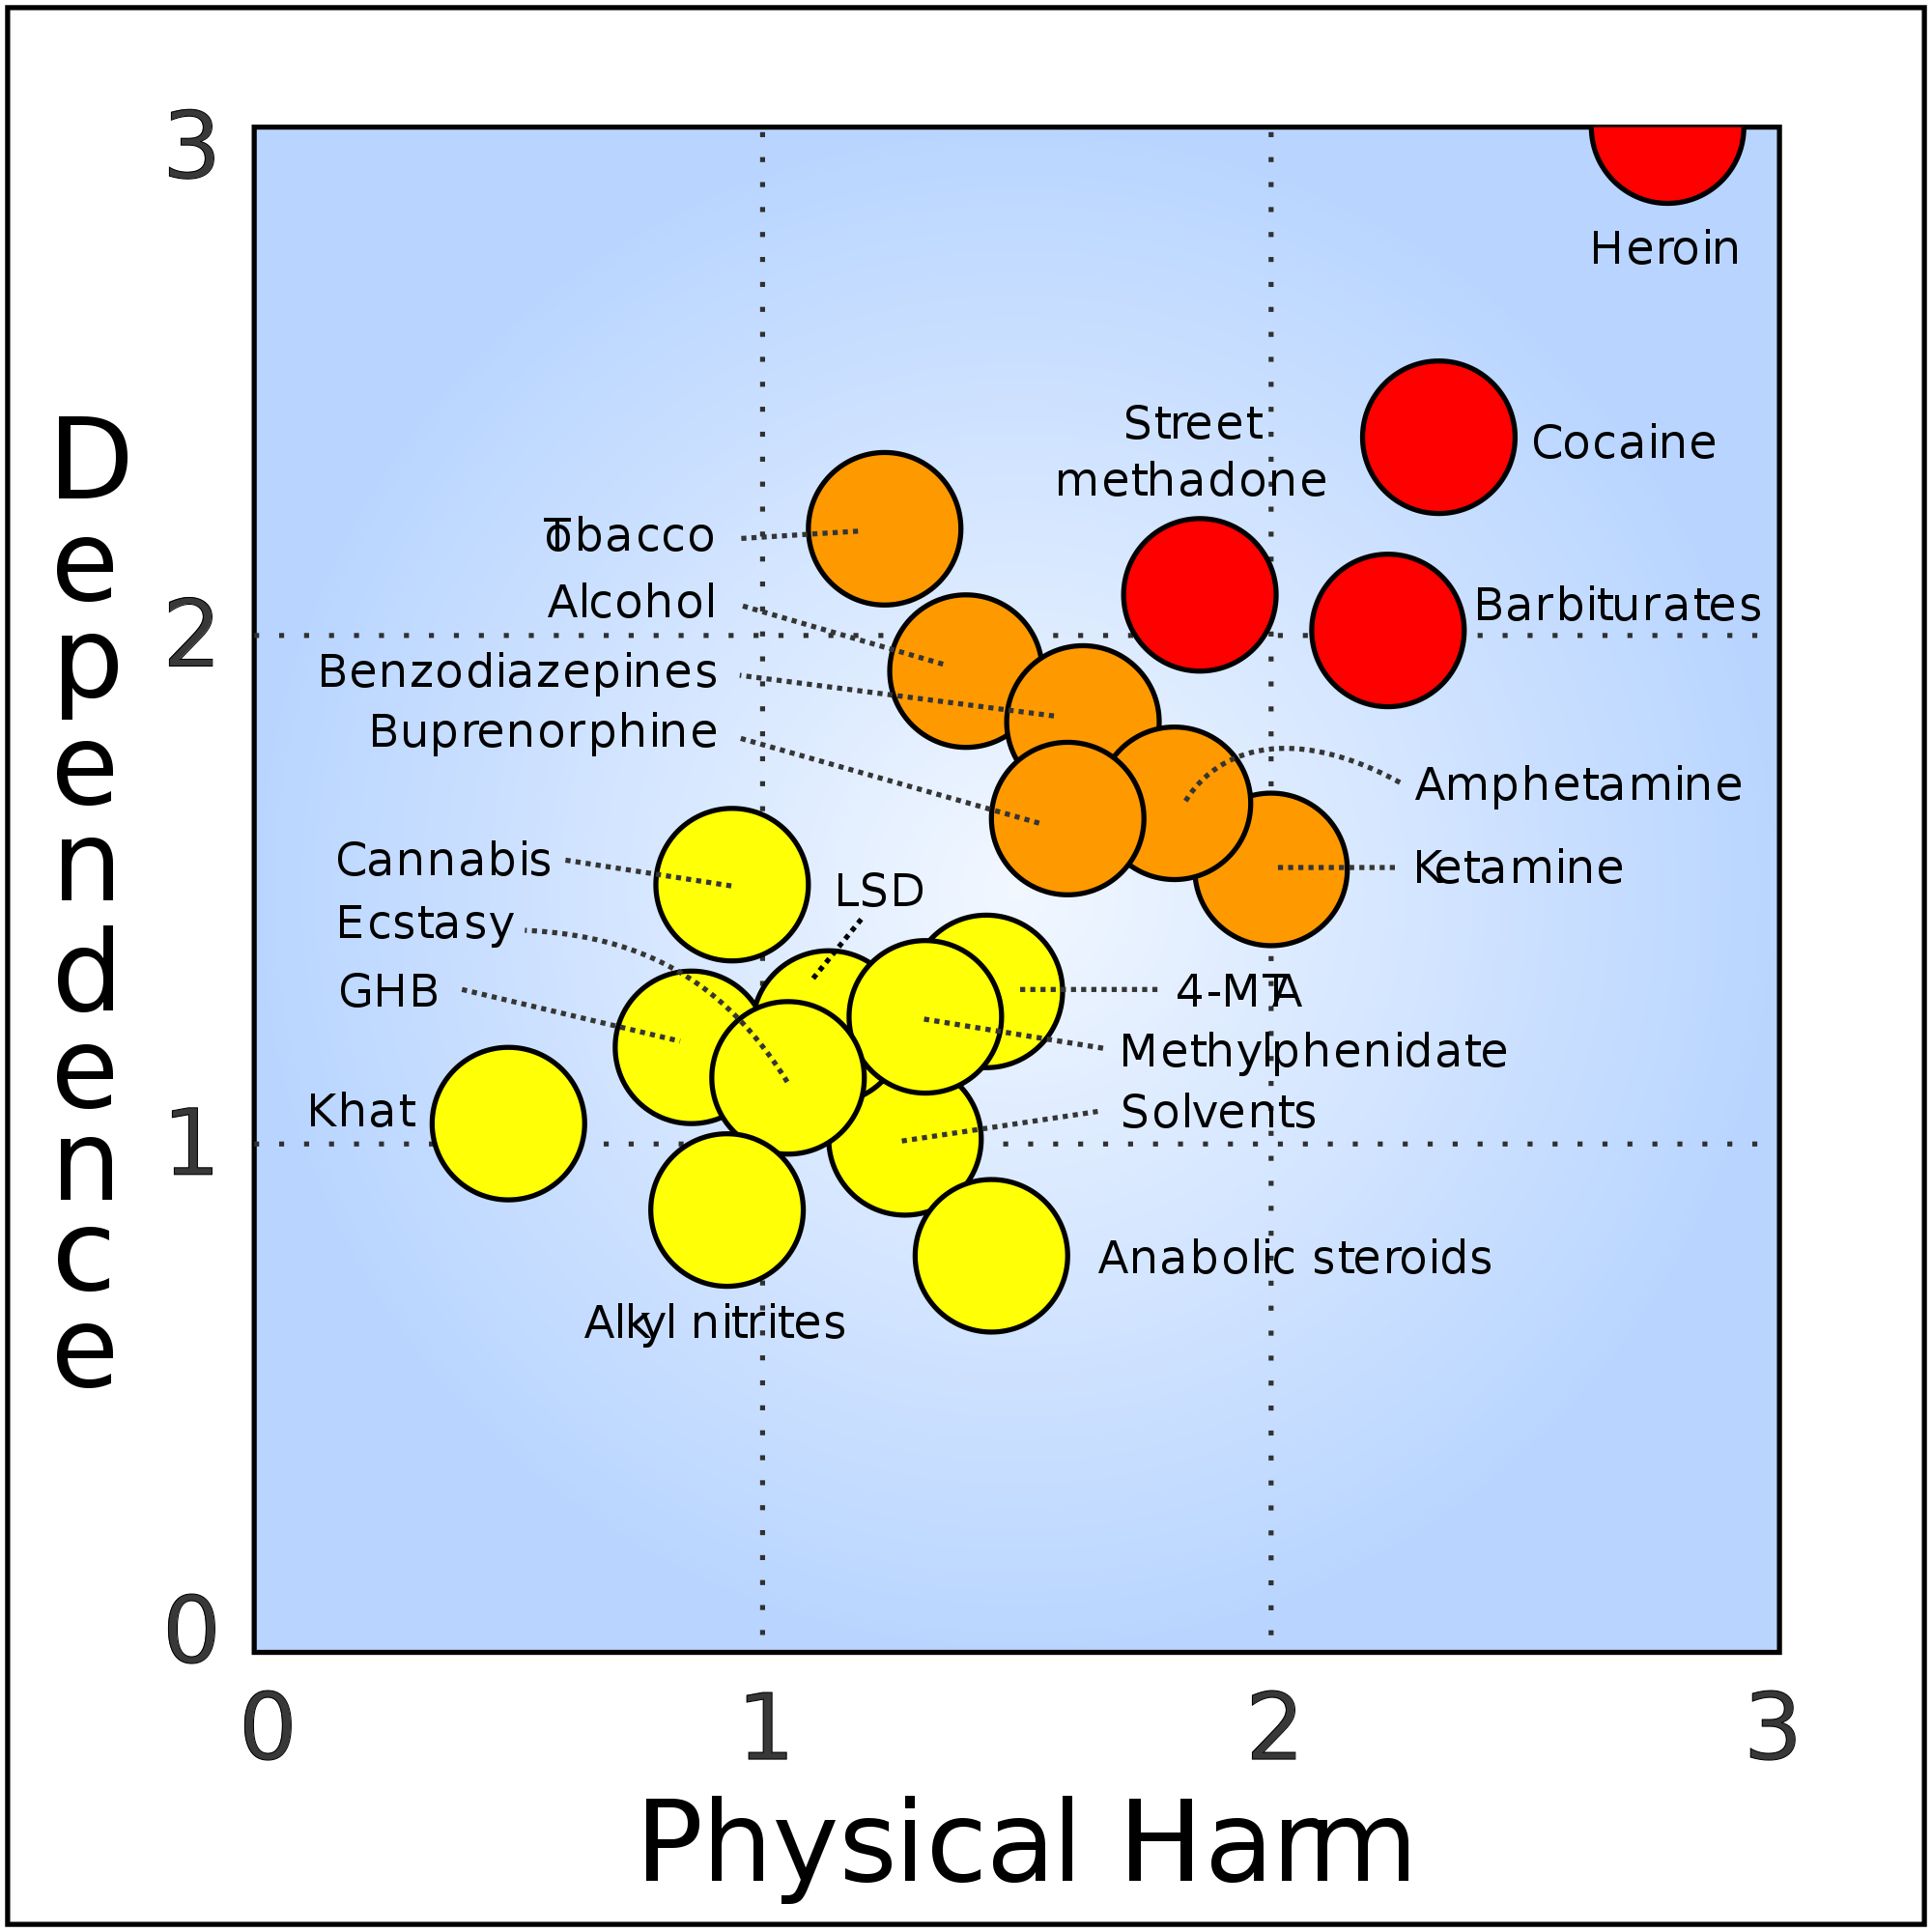 2000px-Rational_scale_to_assess_the_harm_of_drugs_(mean_physical_harm_and_mean_dependence).svg.png